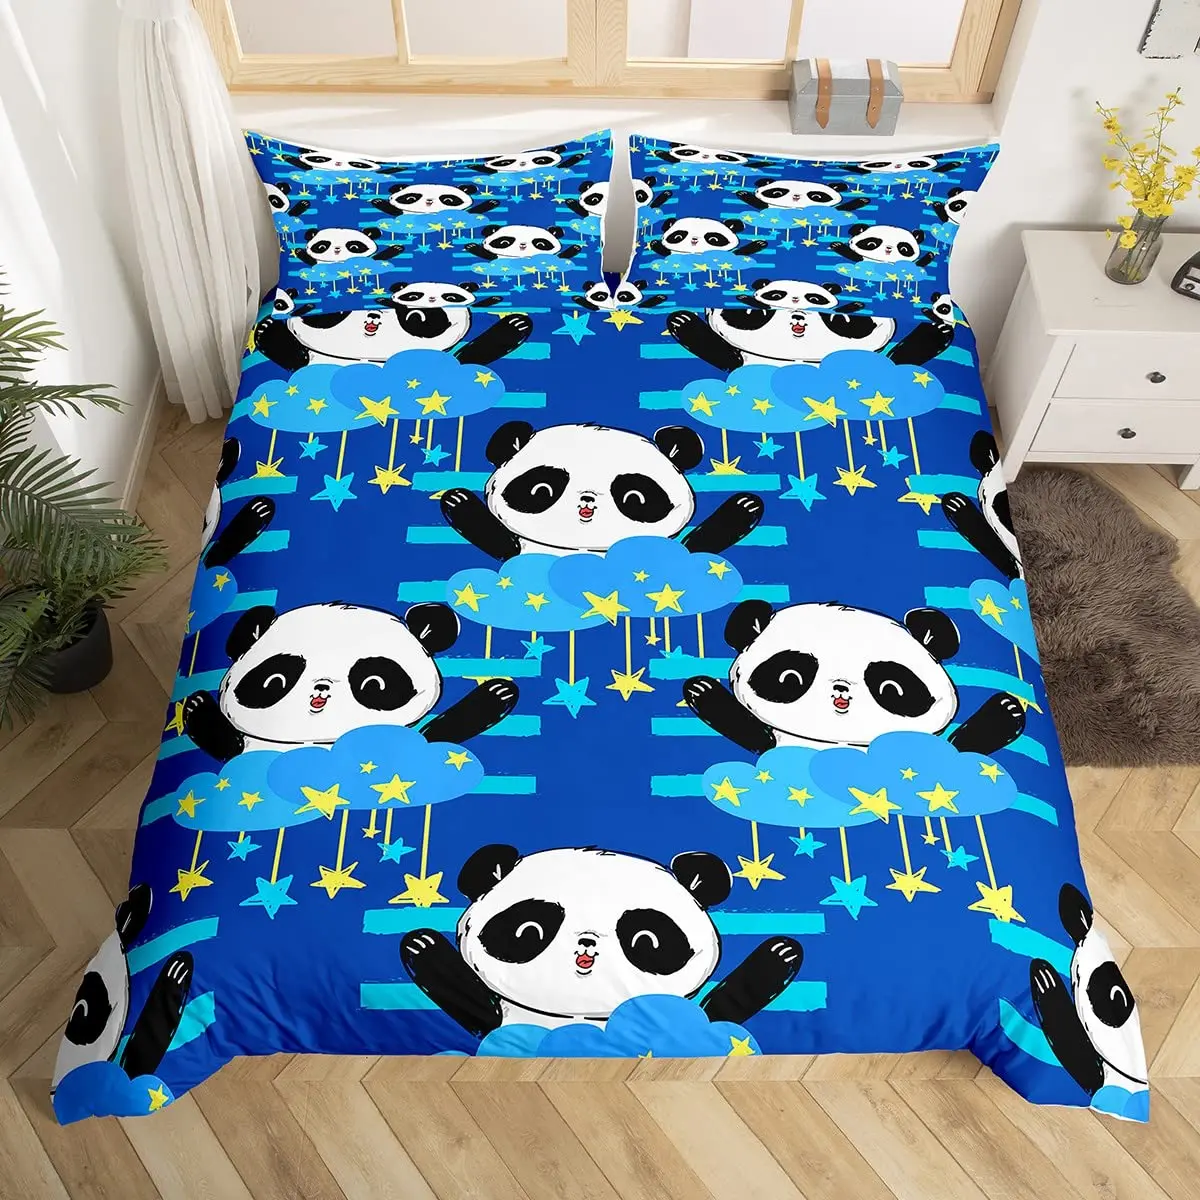 

Panda Duvet Cover Set King Size Black and White Animal Comforter Cover with Pillowcases Starry Sky Blue Ultra Soft Quilt Cover